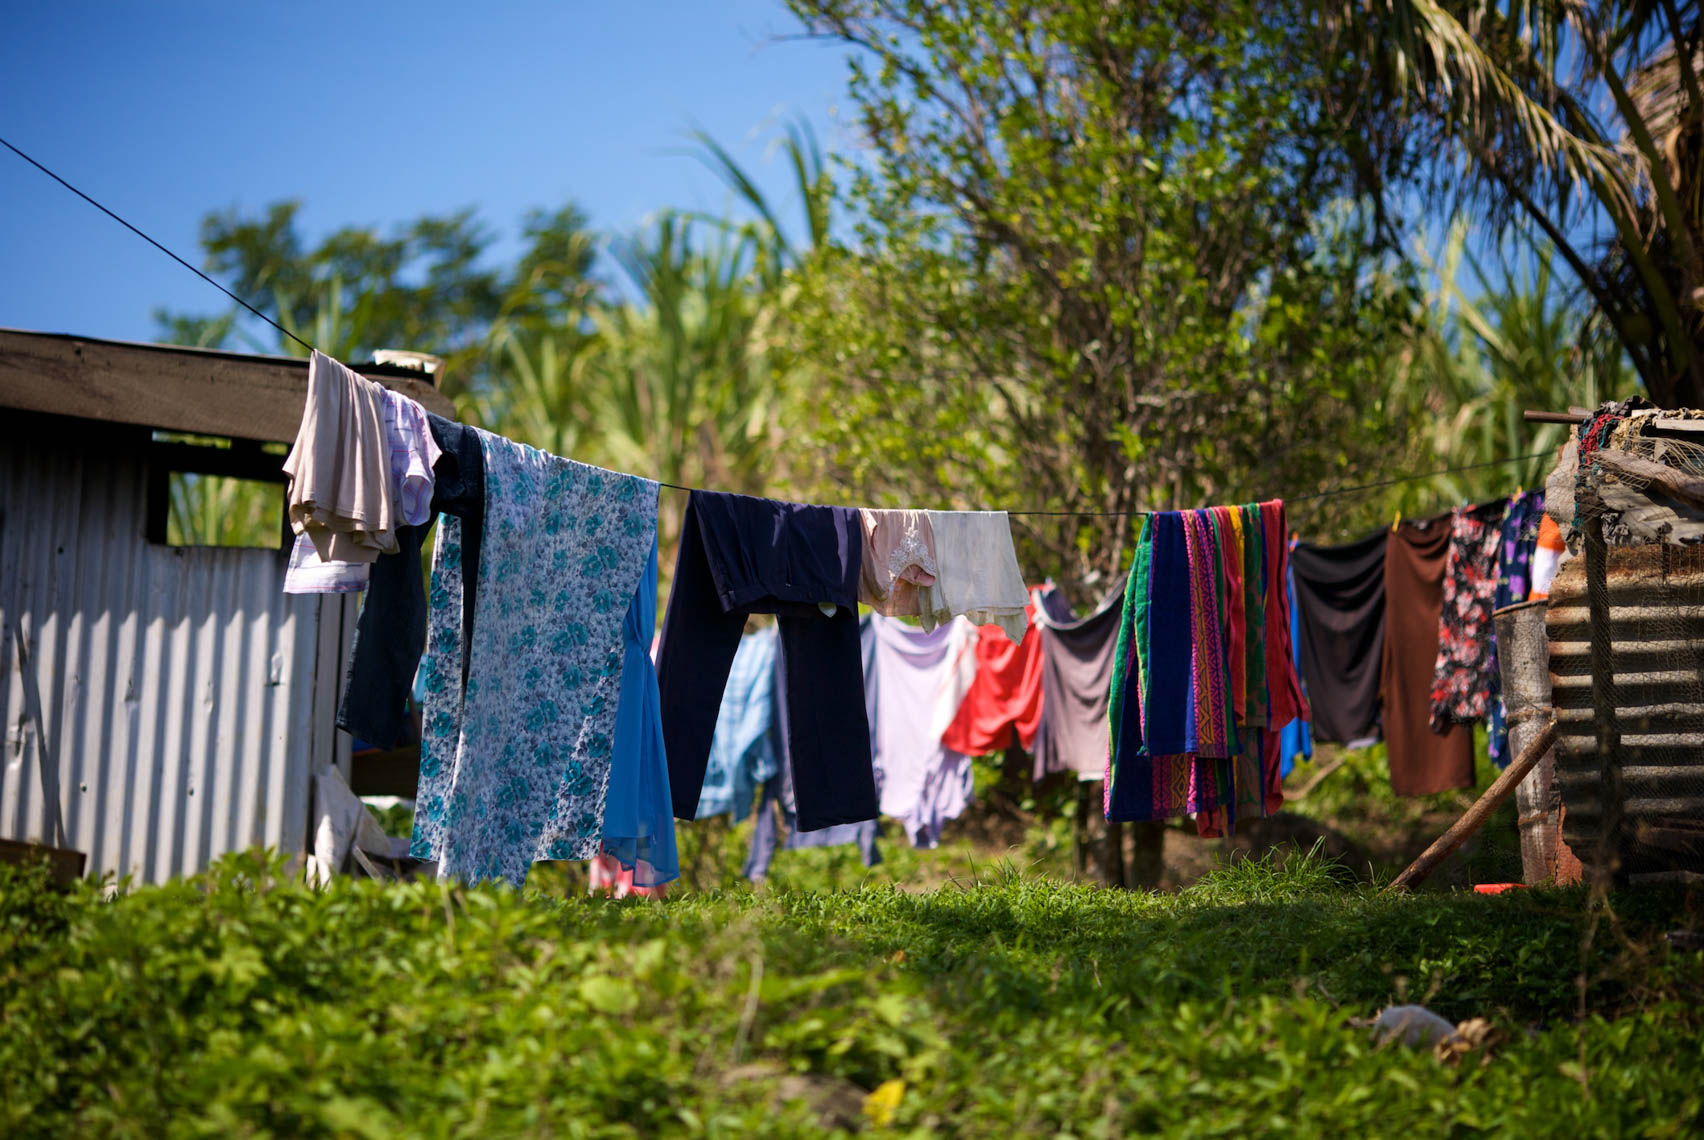 Laundry Dries on the Line in Fiji